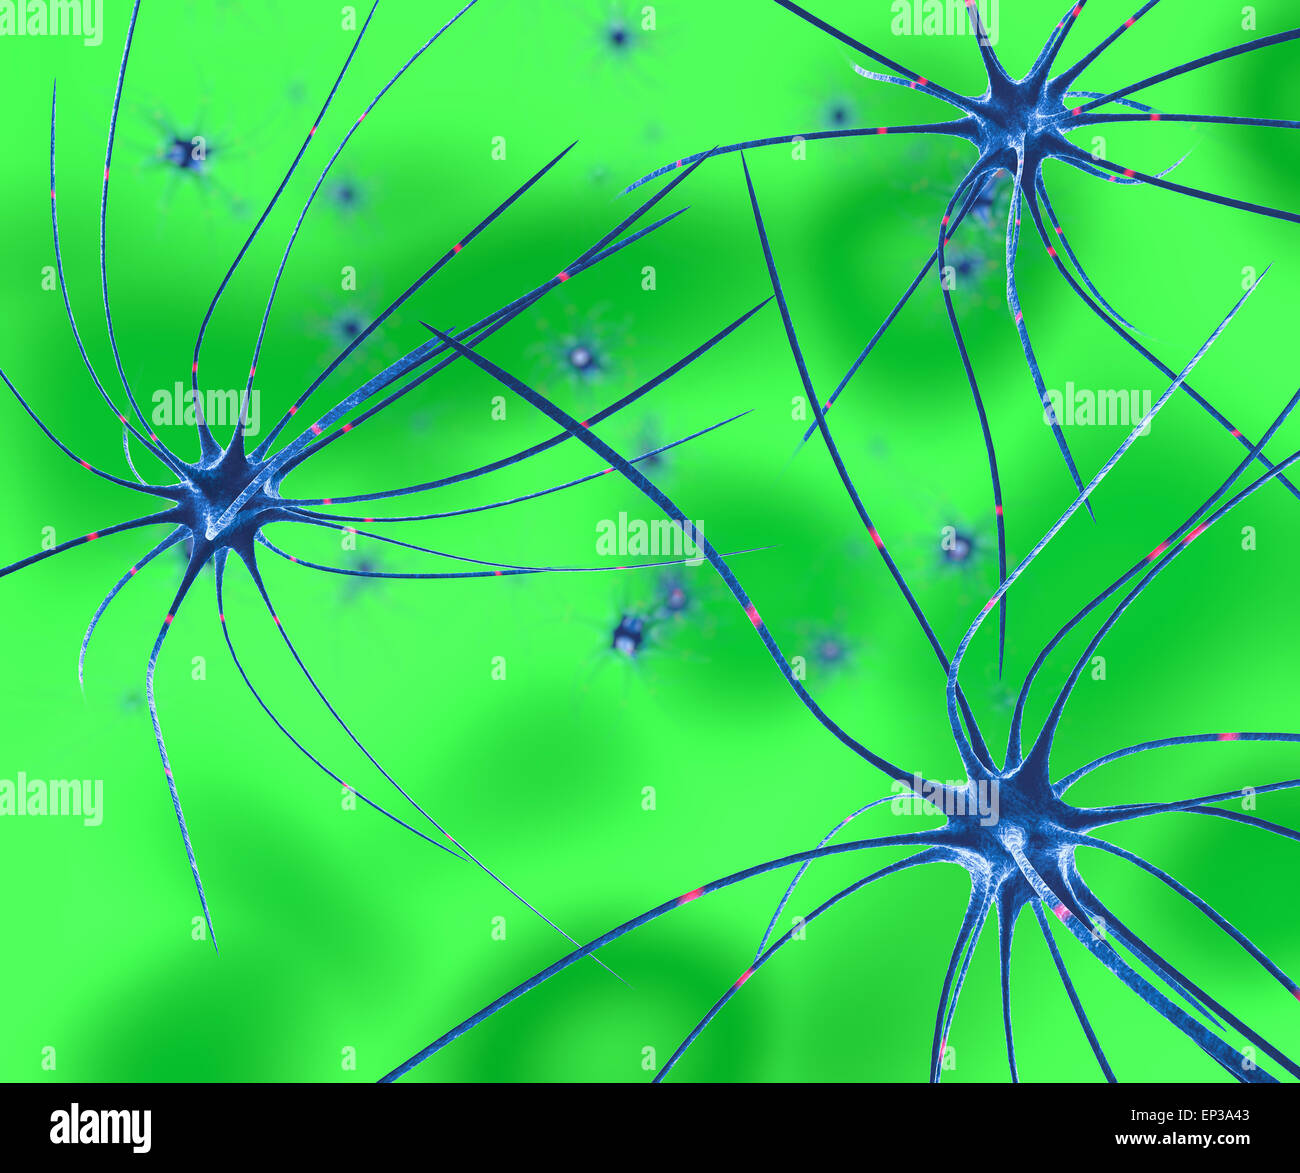 Render of group of neurons on green background Stock Photo